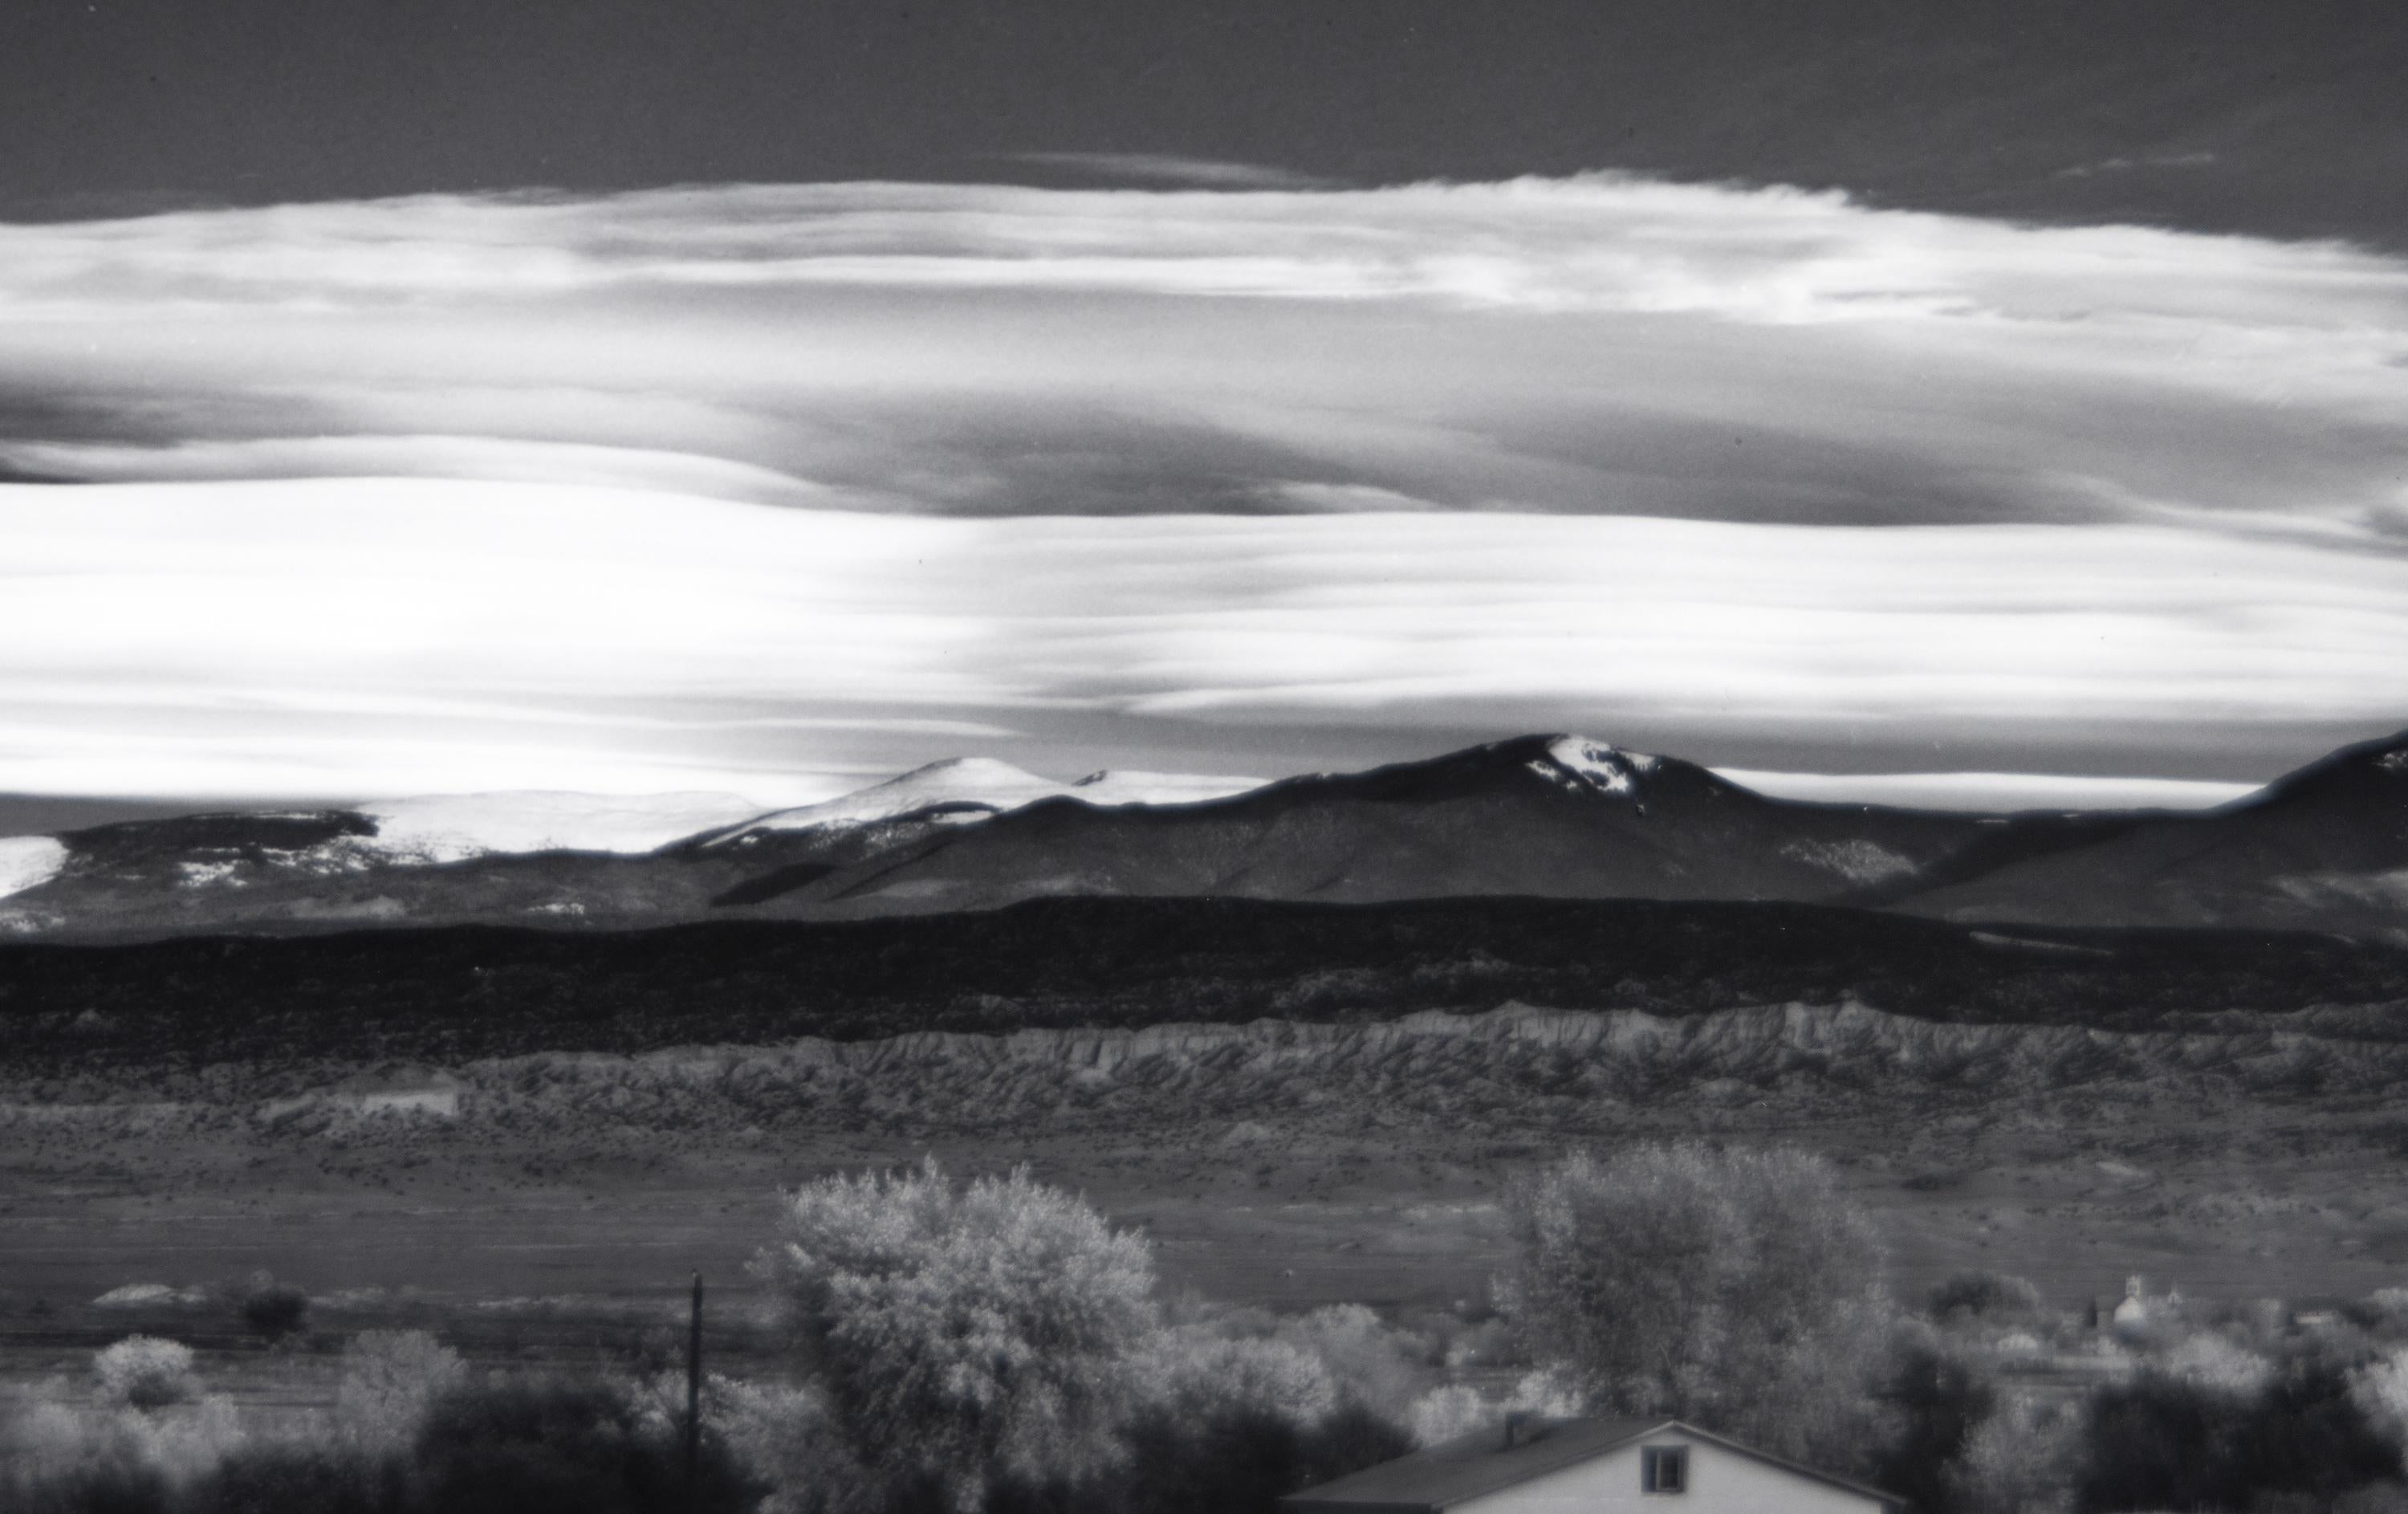 Moonrise, Hernandez, New Mexico - American Realist Photograph by Ansel Adams